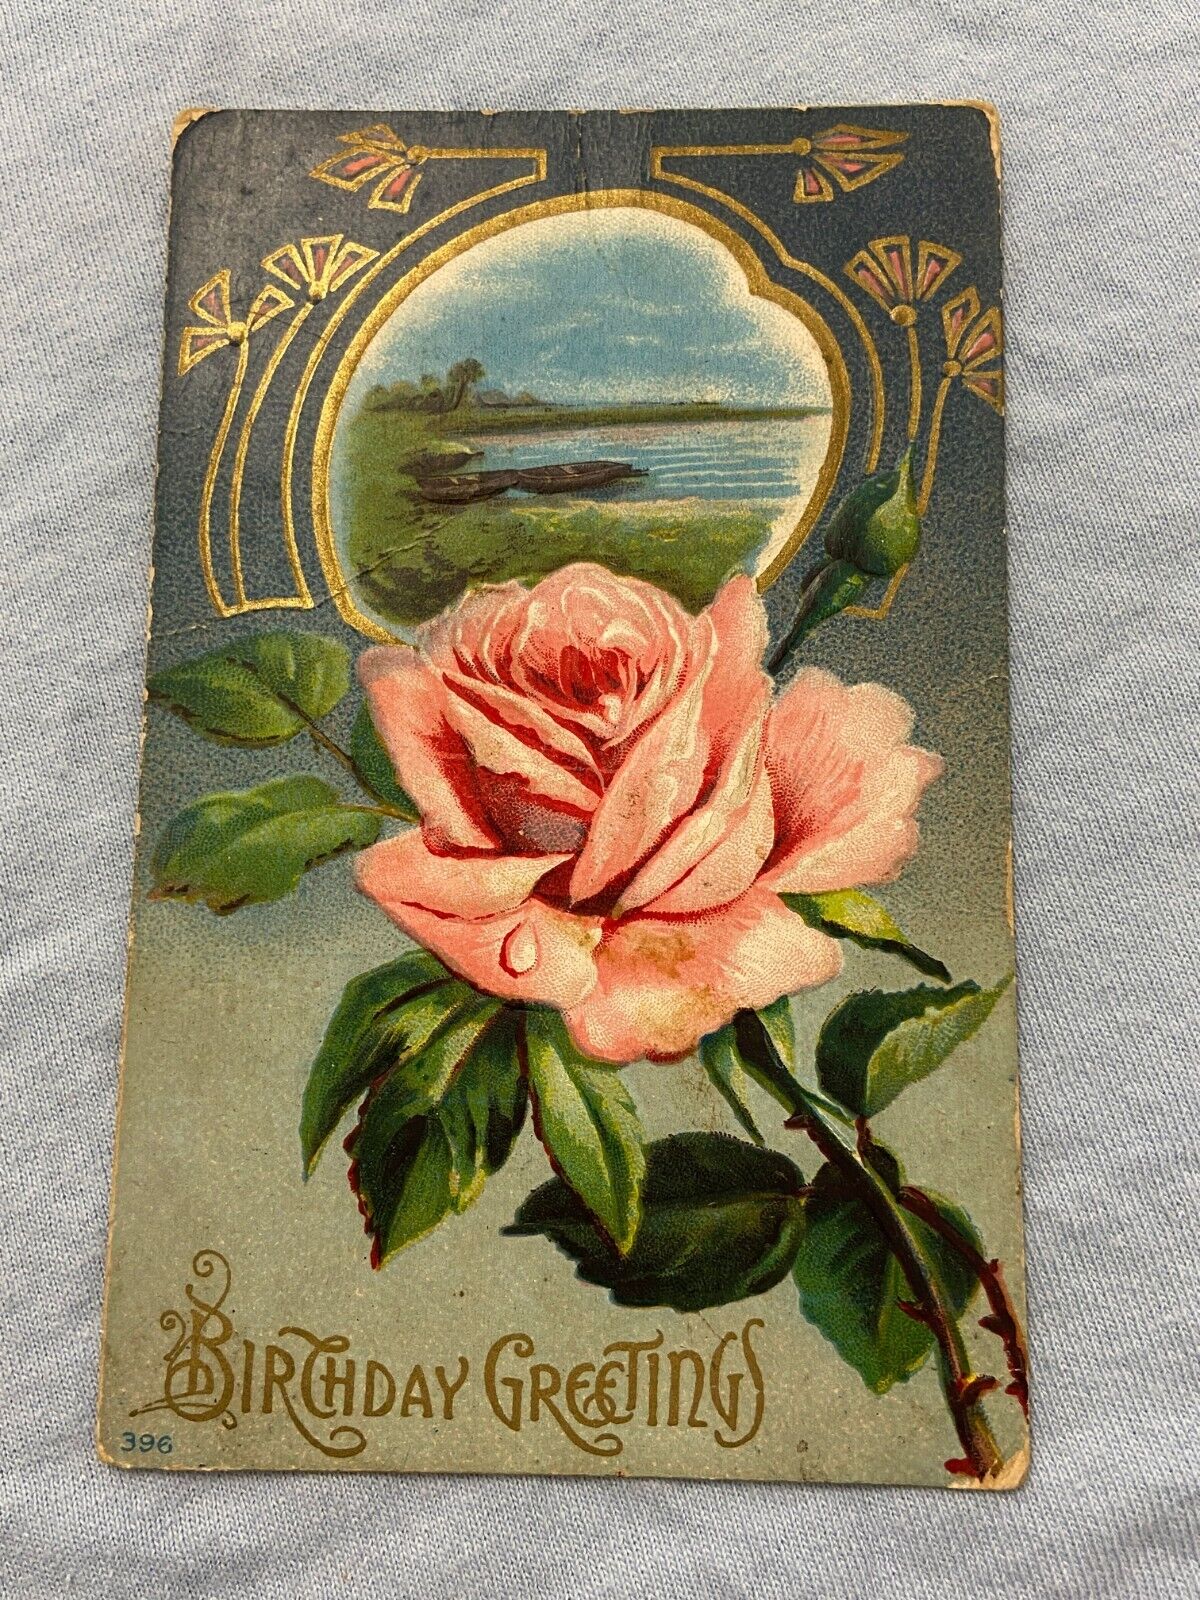 Birthday Greetings 396 Red Green Rose With Stems Embossed Post Card 5.5\